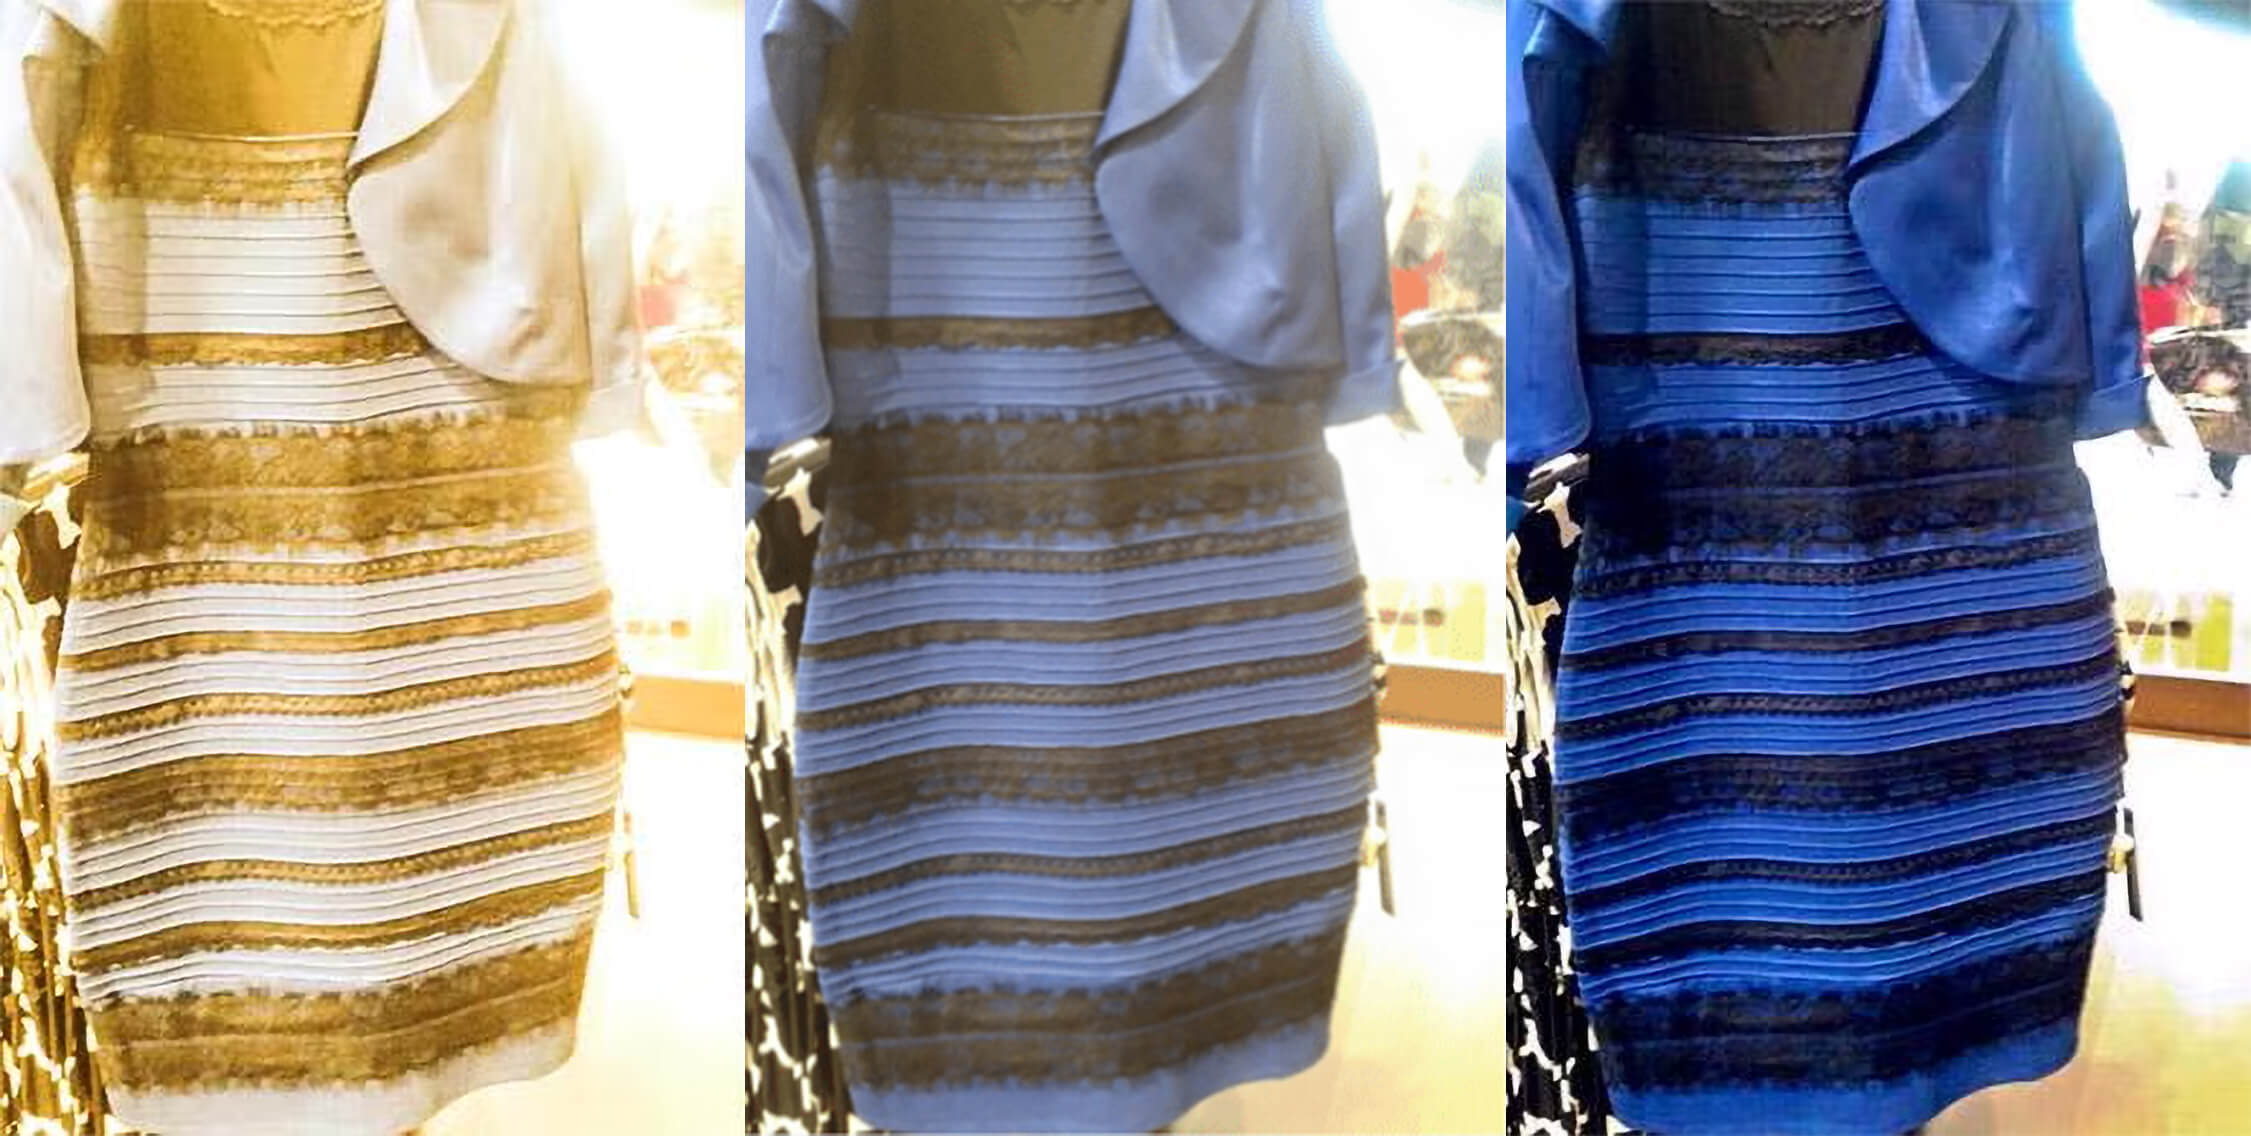 The Gold Dress vs. Blue Dress Debate caused by Color Constancy Confusion.